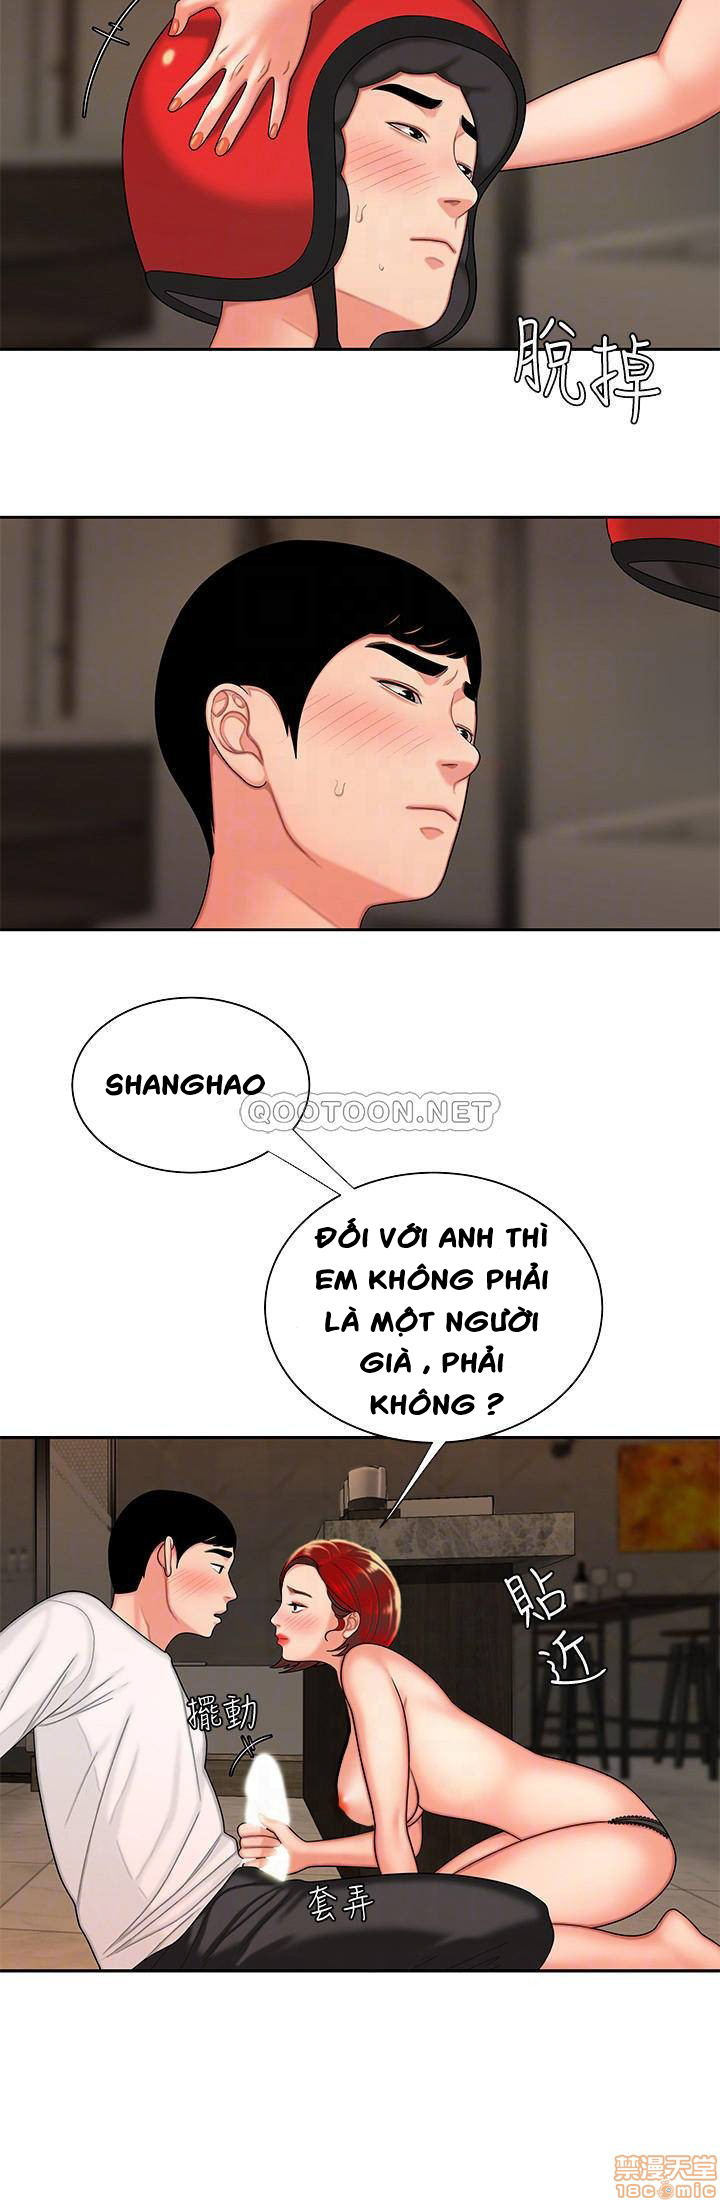 Chapter 004 : Chapter 04 ảnh 20